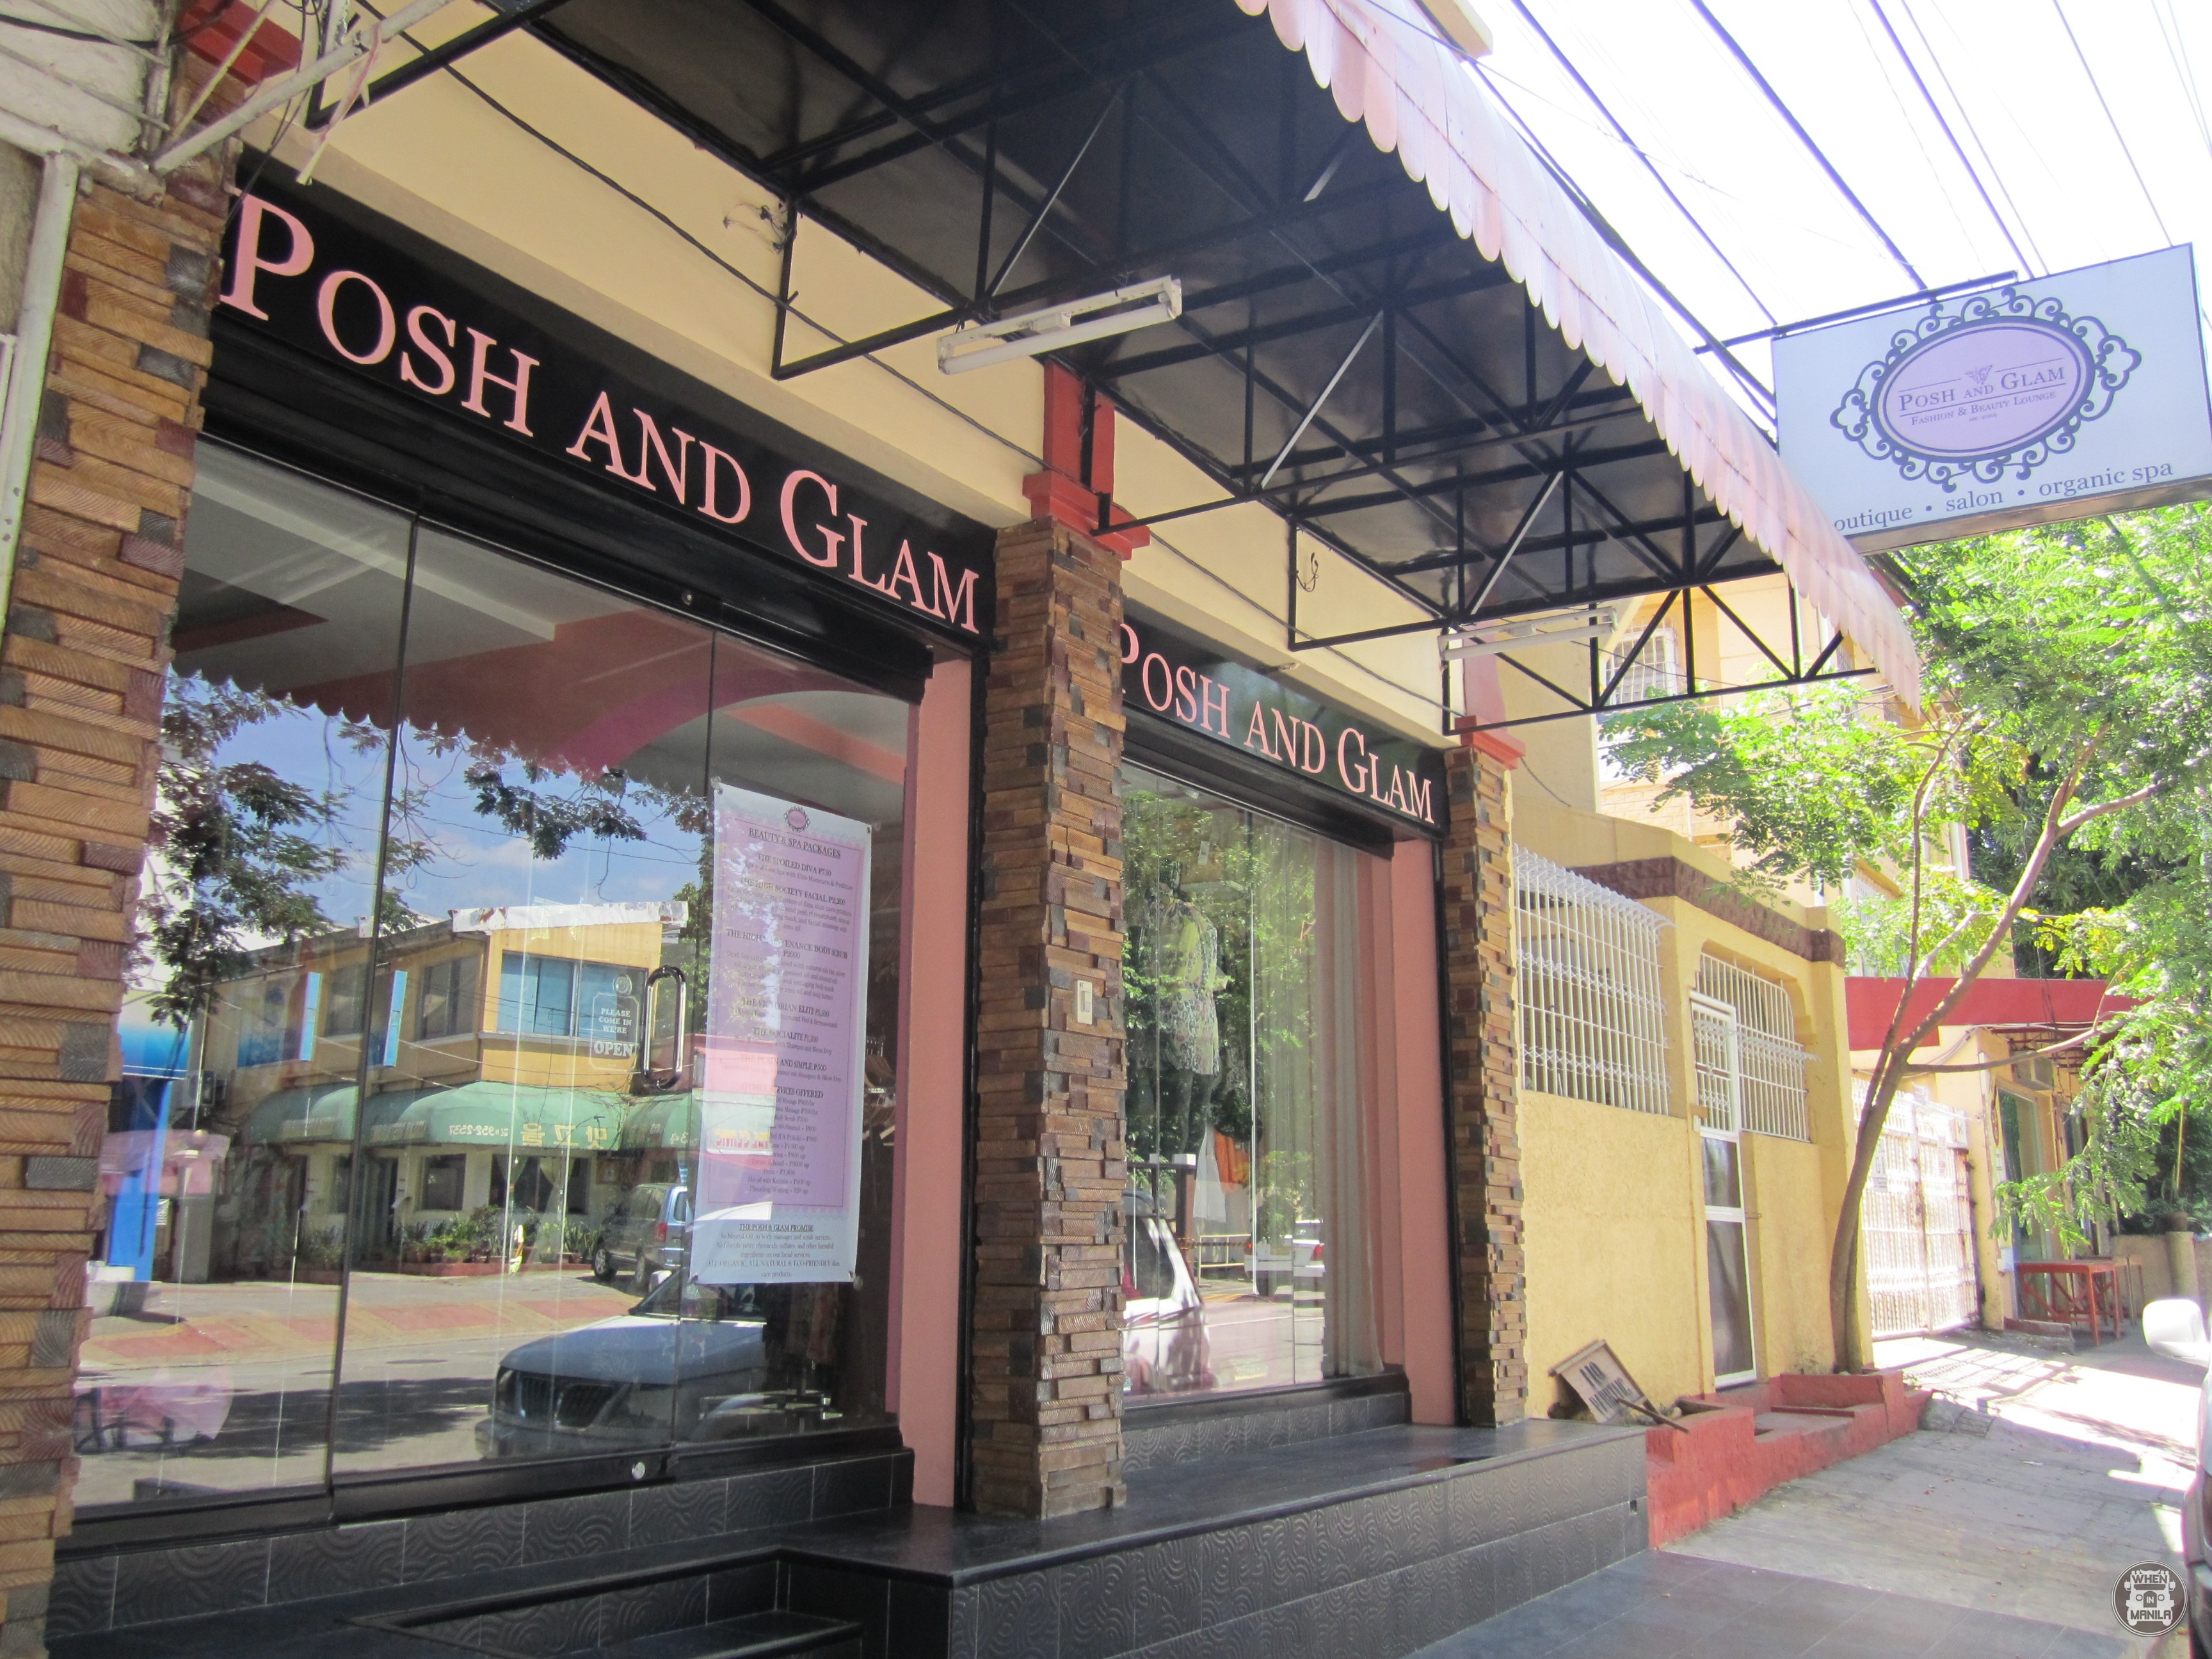 Posh and Glam - Another Storefront View